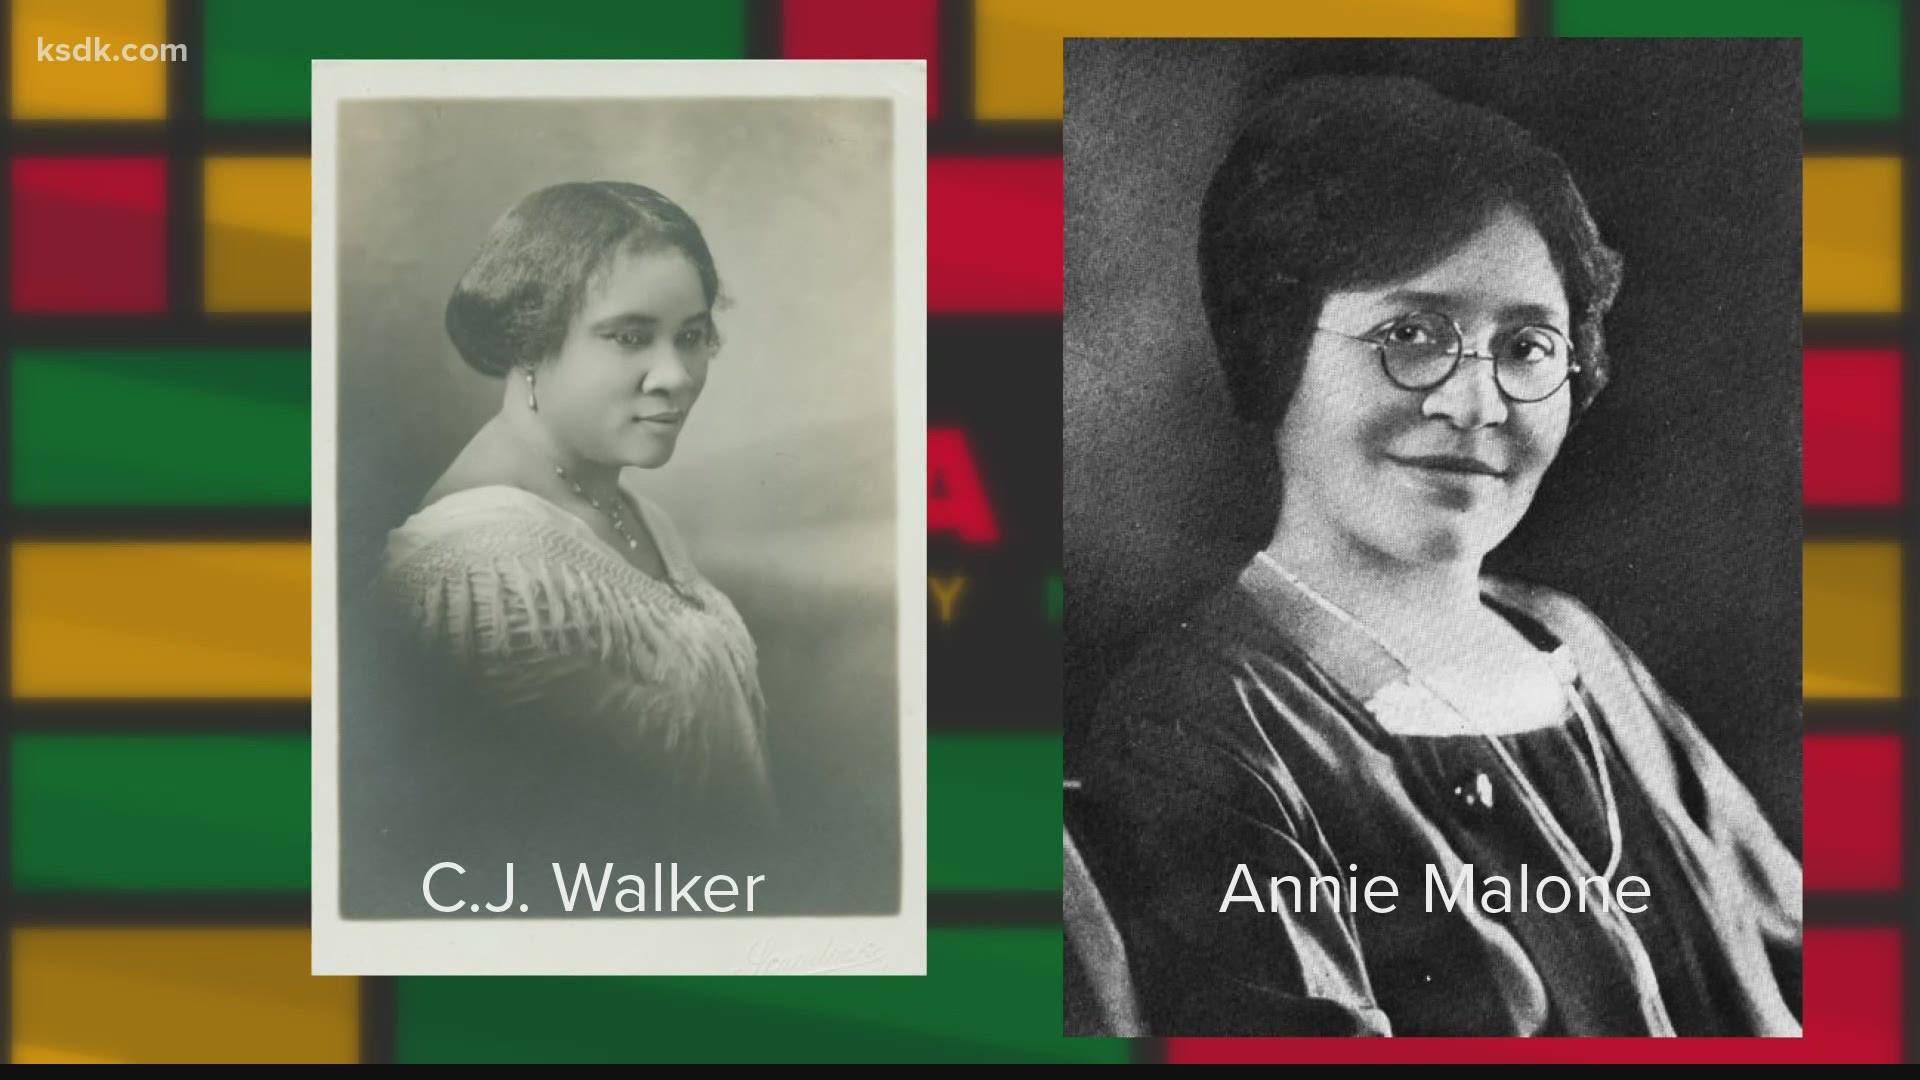 Netflix's "Self-Made" puts early 20th century St. Louis in the limelight, focusing on two trailblazing haircare entrepreneurs: Madam C.J. Walker and Annie Malone